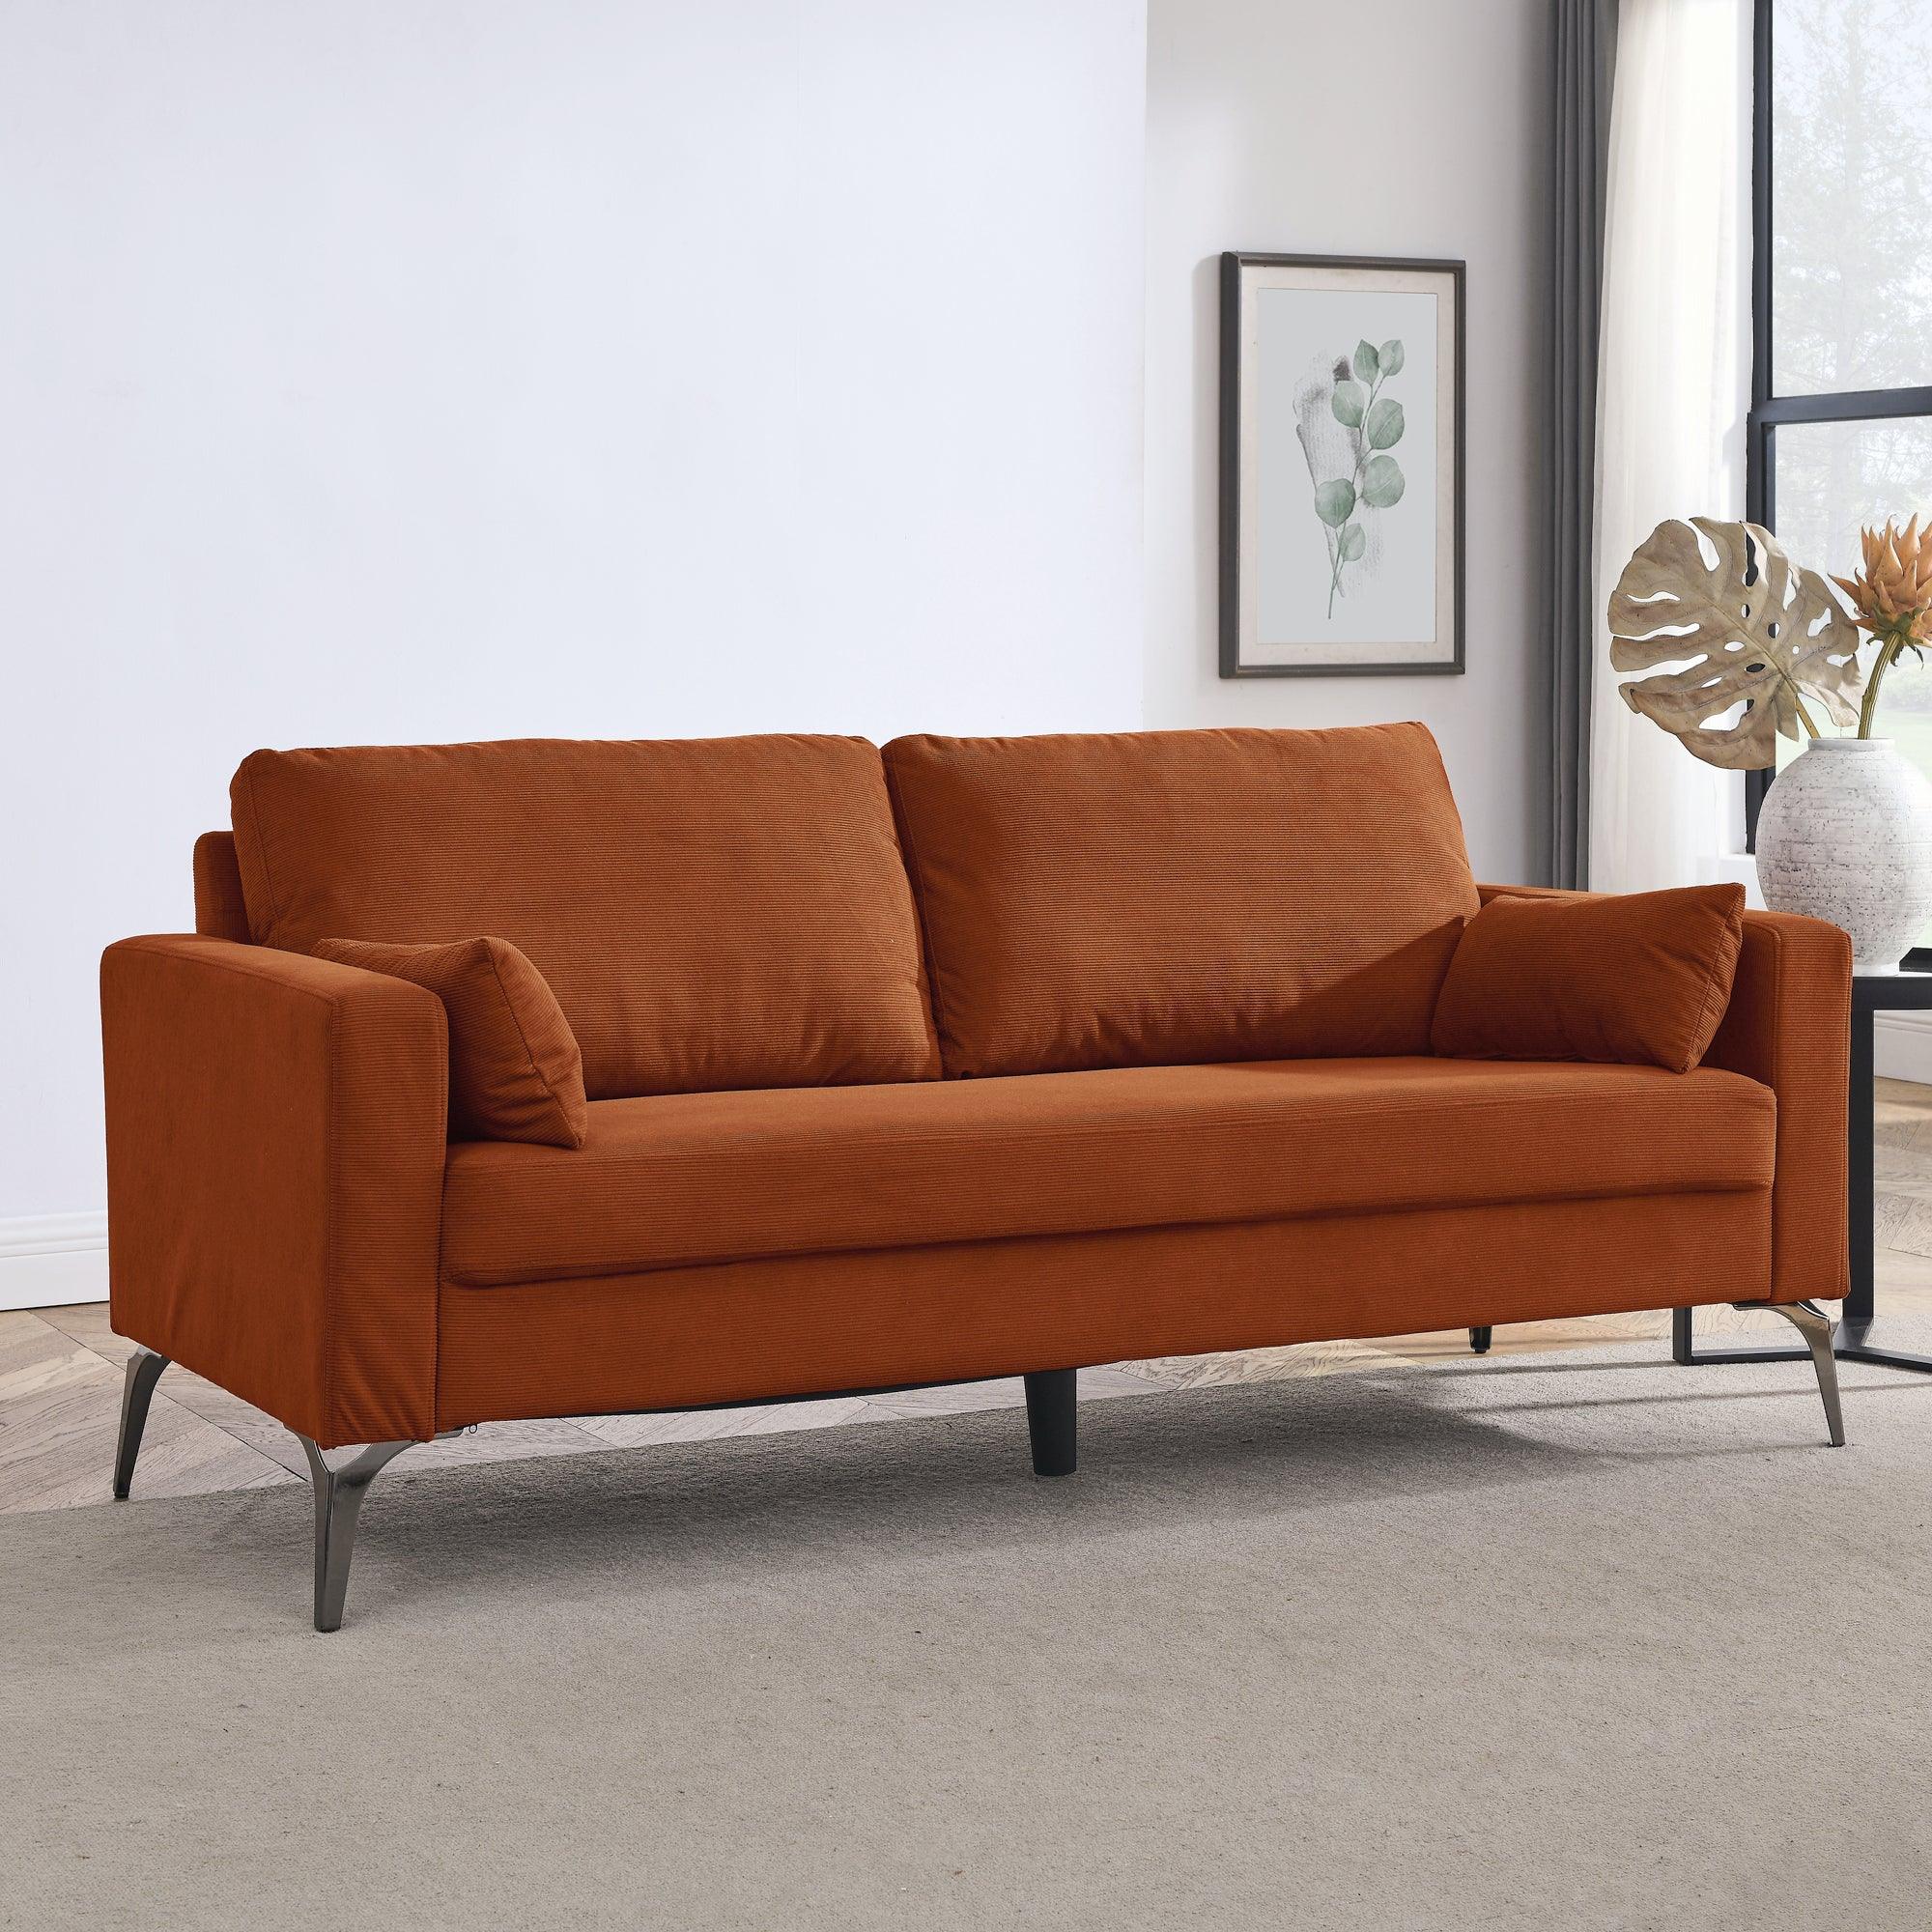 🆓🚛 3-Seater Sofa With Square Arms and Tight Back, With Two Small Pillows, Corduroy Orange